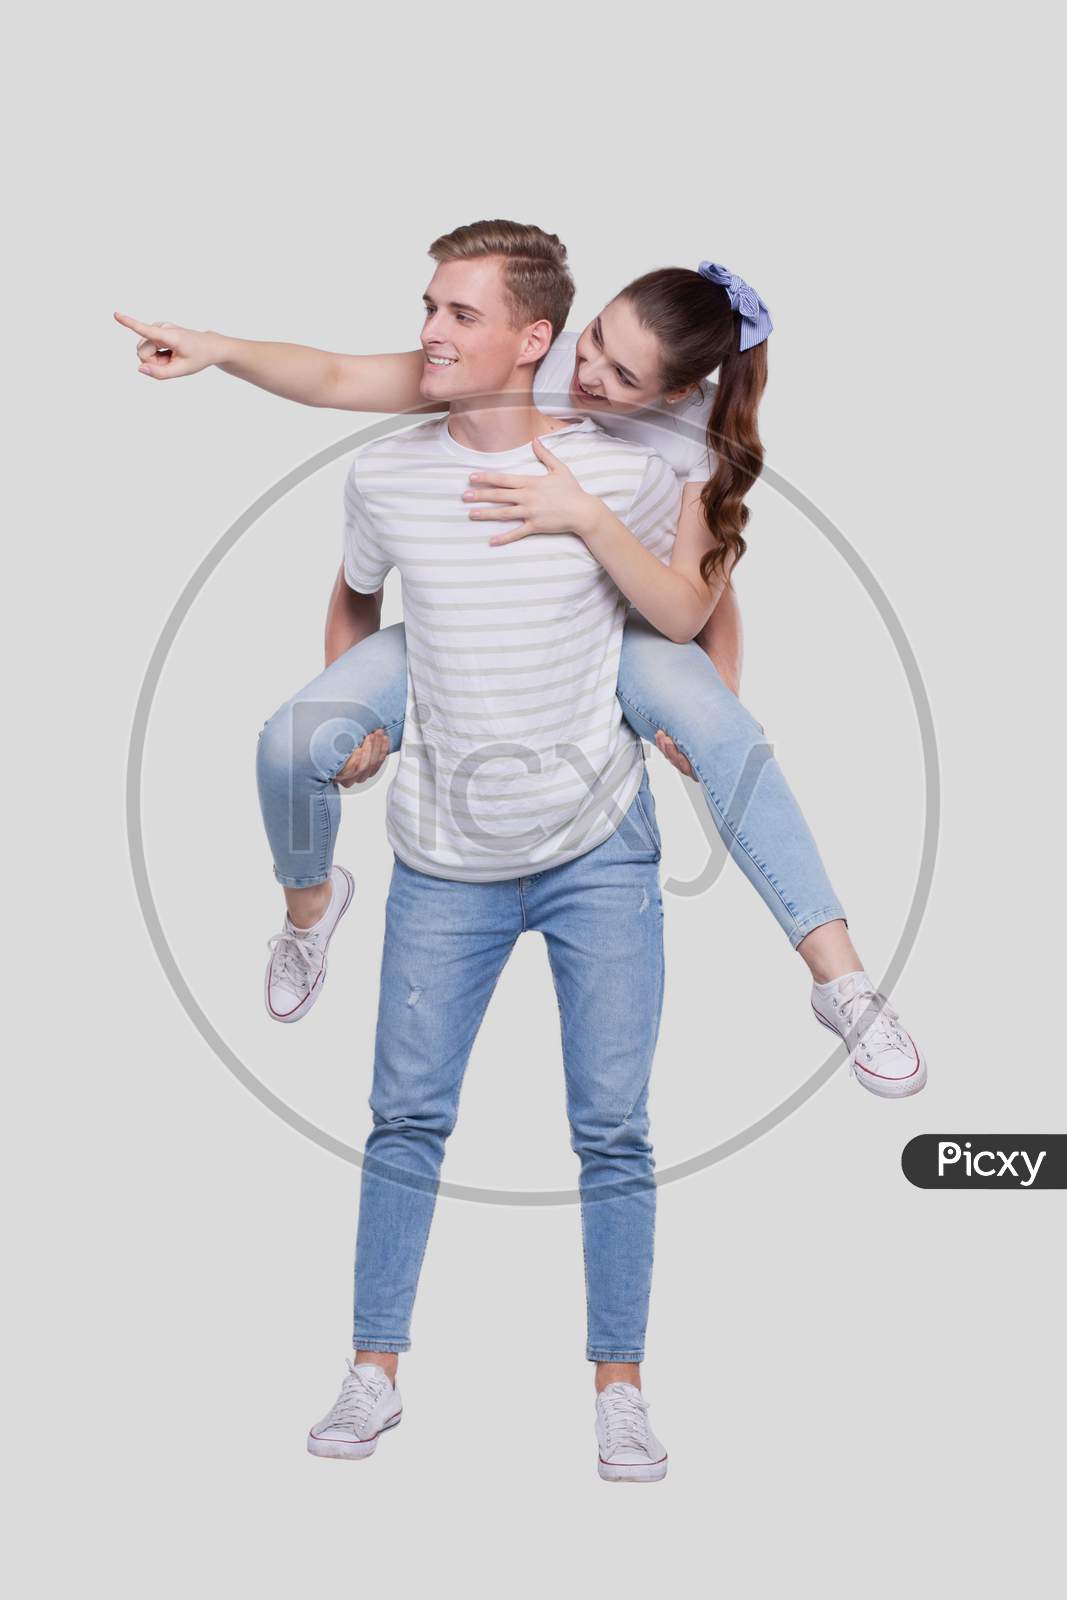 Girl Riding Man Back. Man Holding Girl. Couple Isolated. Girl On Man Back Sitting. Girl Pointing To Side